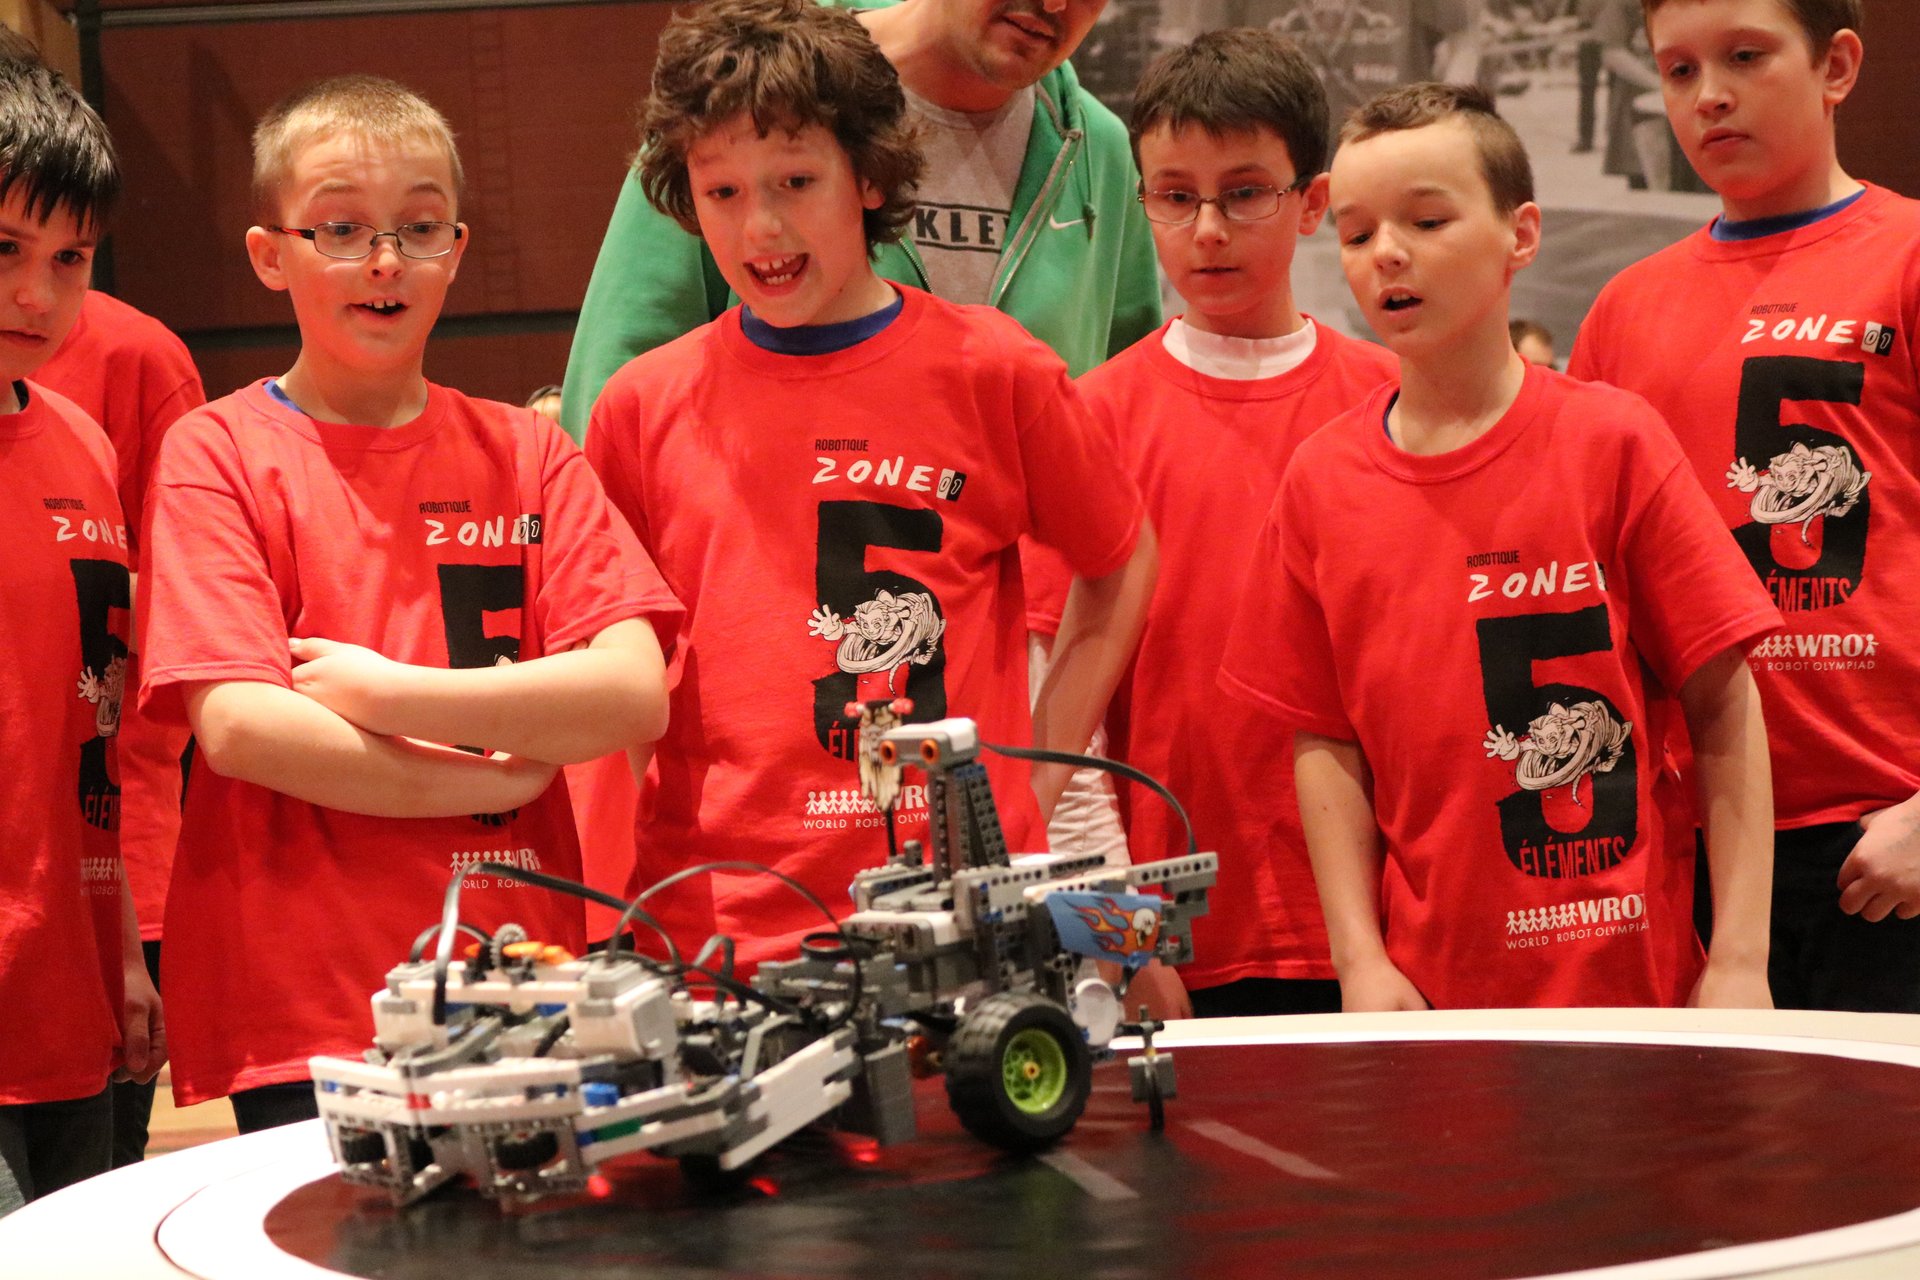 Get to Them Early: A Robotics Competition for School Kids